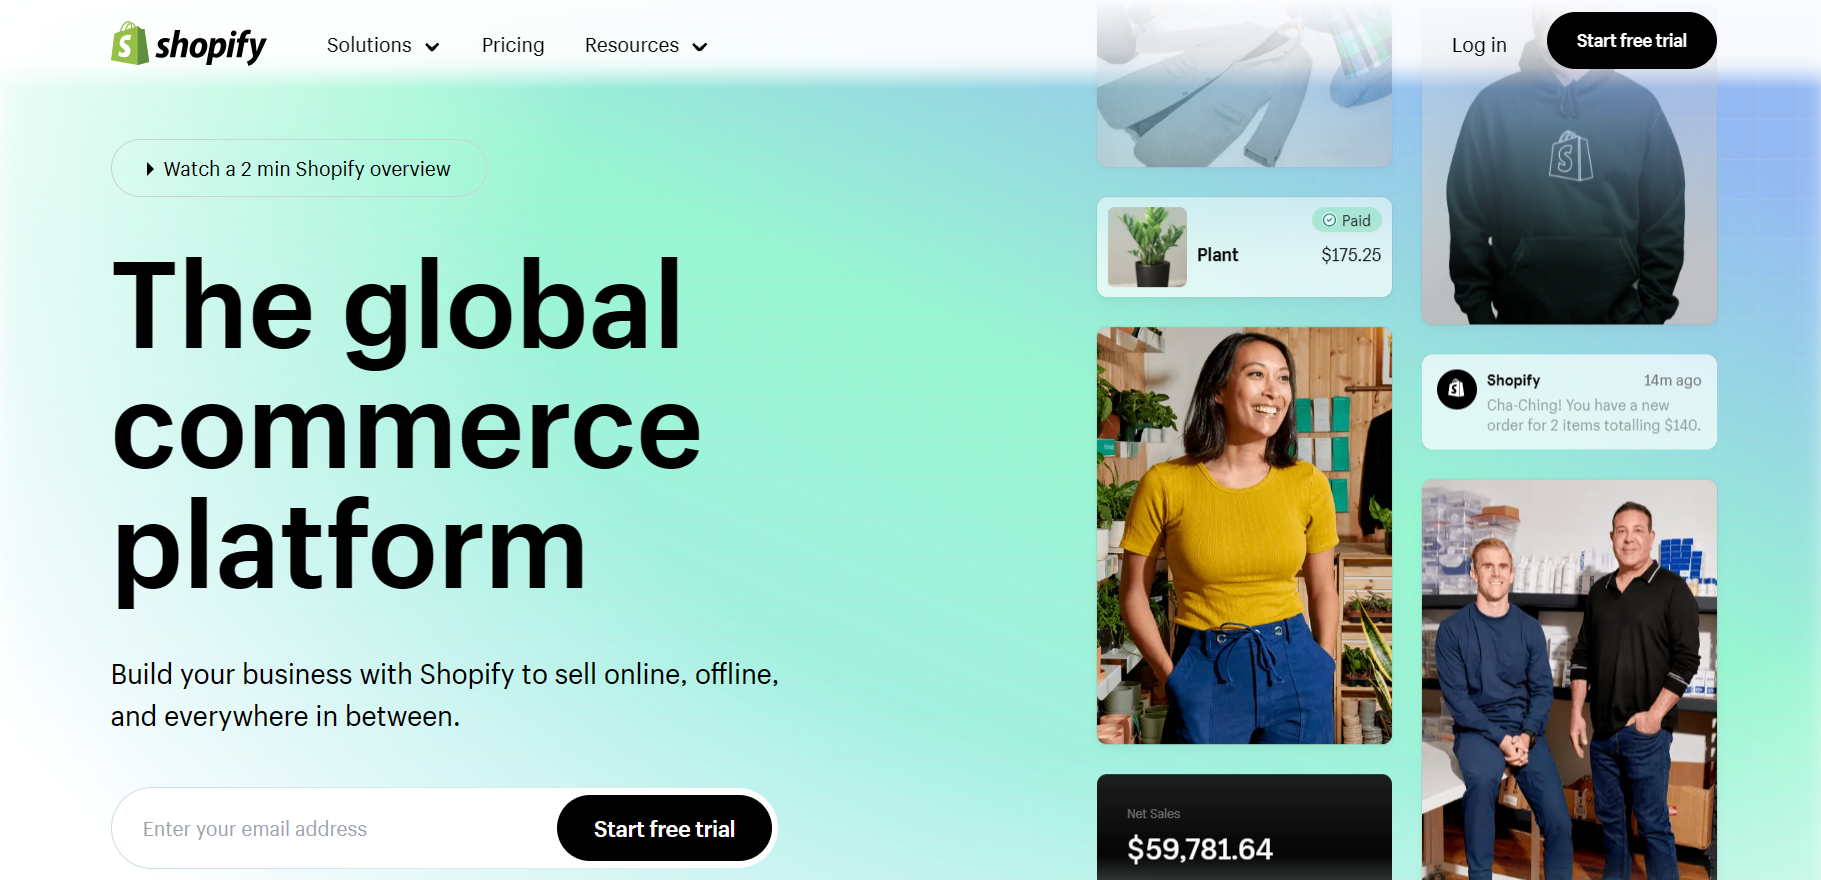 Shopify Features: A Comprehensive Guide to the Tools and Capabilities of the Ecommerce Platform